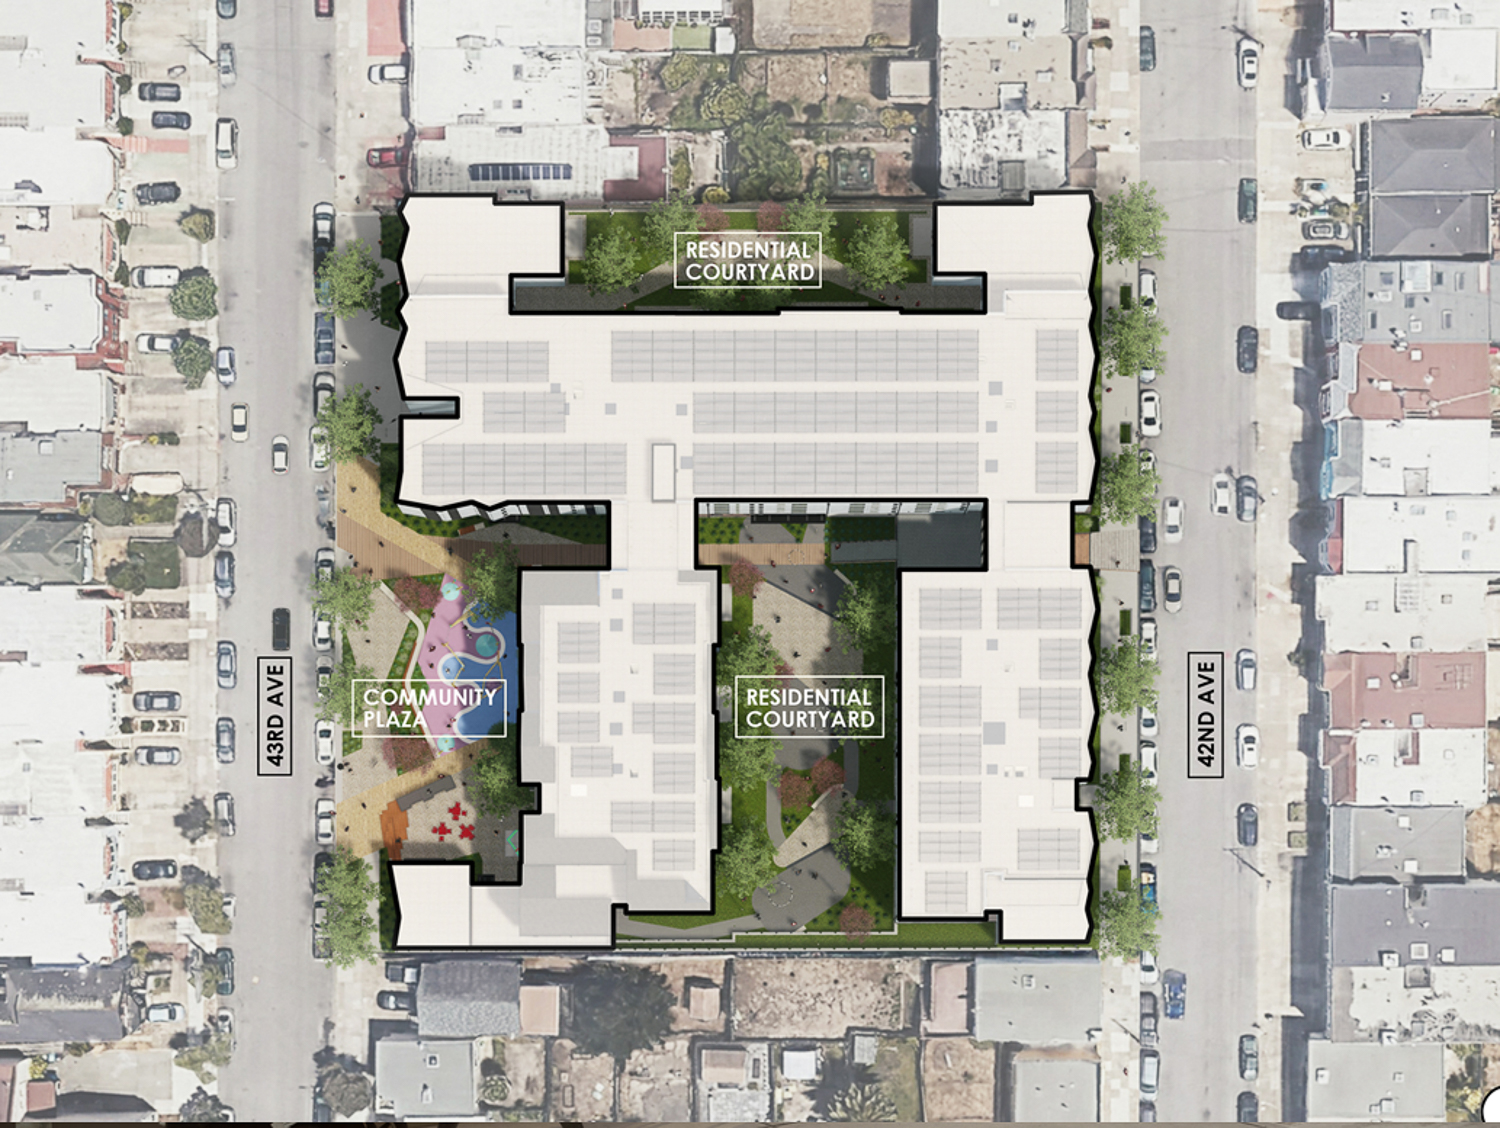 Shirley Chisholm Village Educator Housing site map, rendering by BAR Architecture